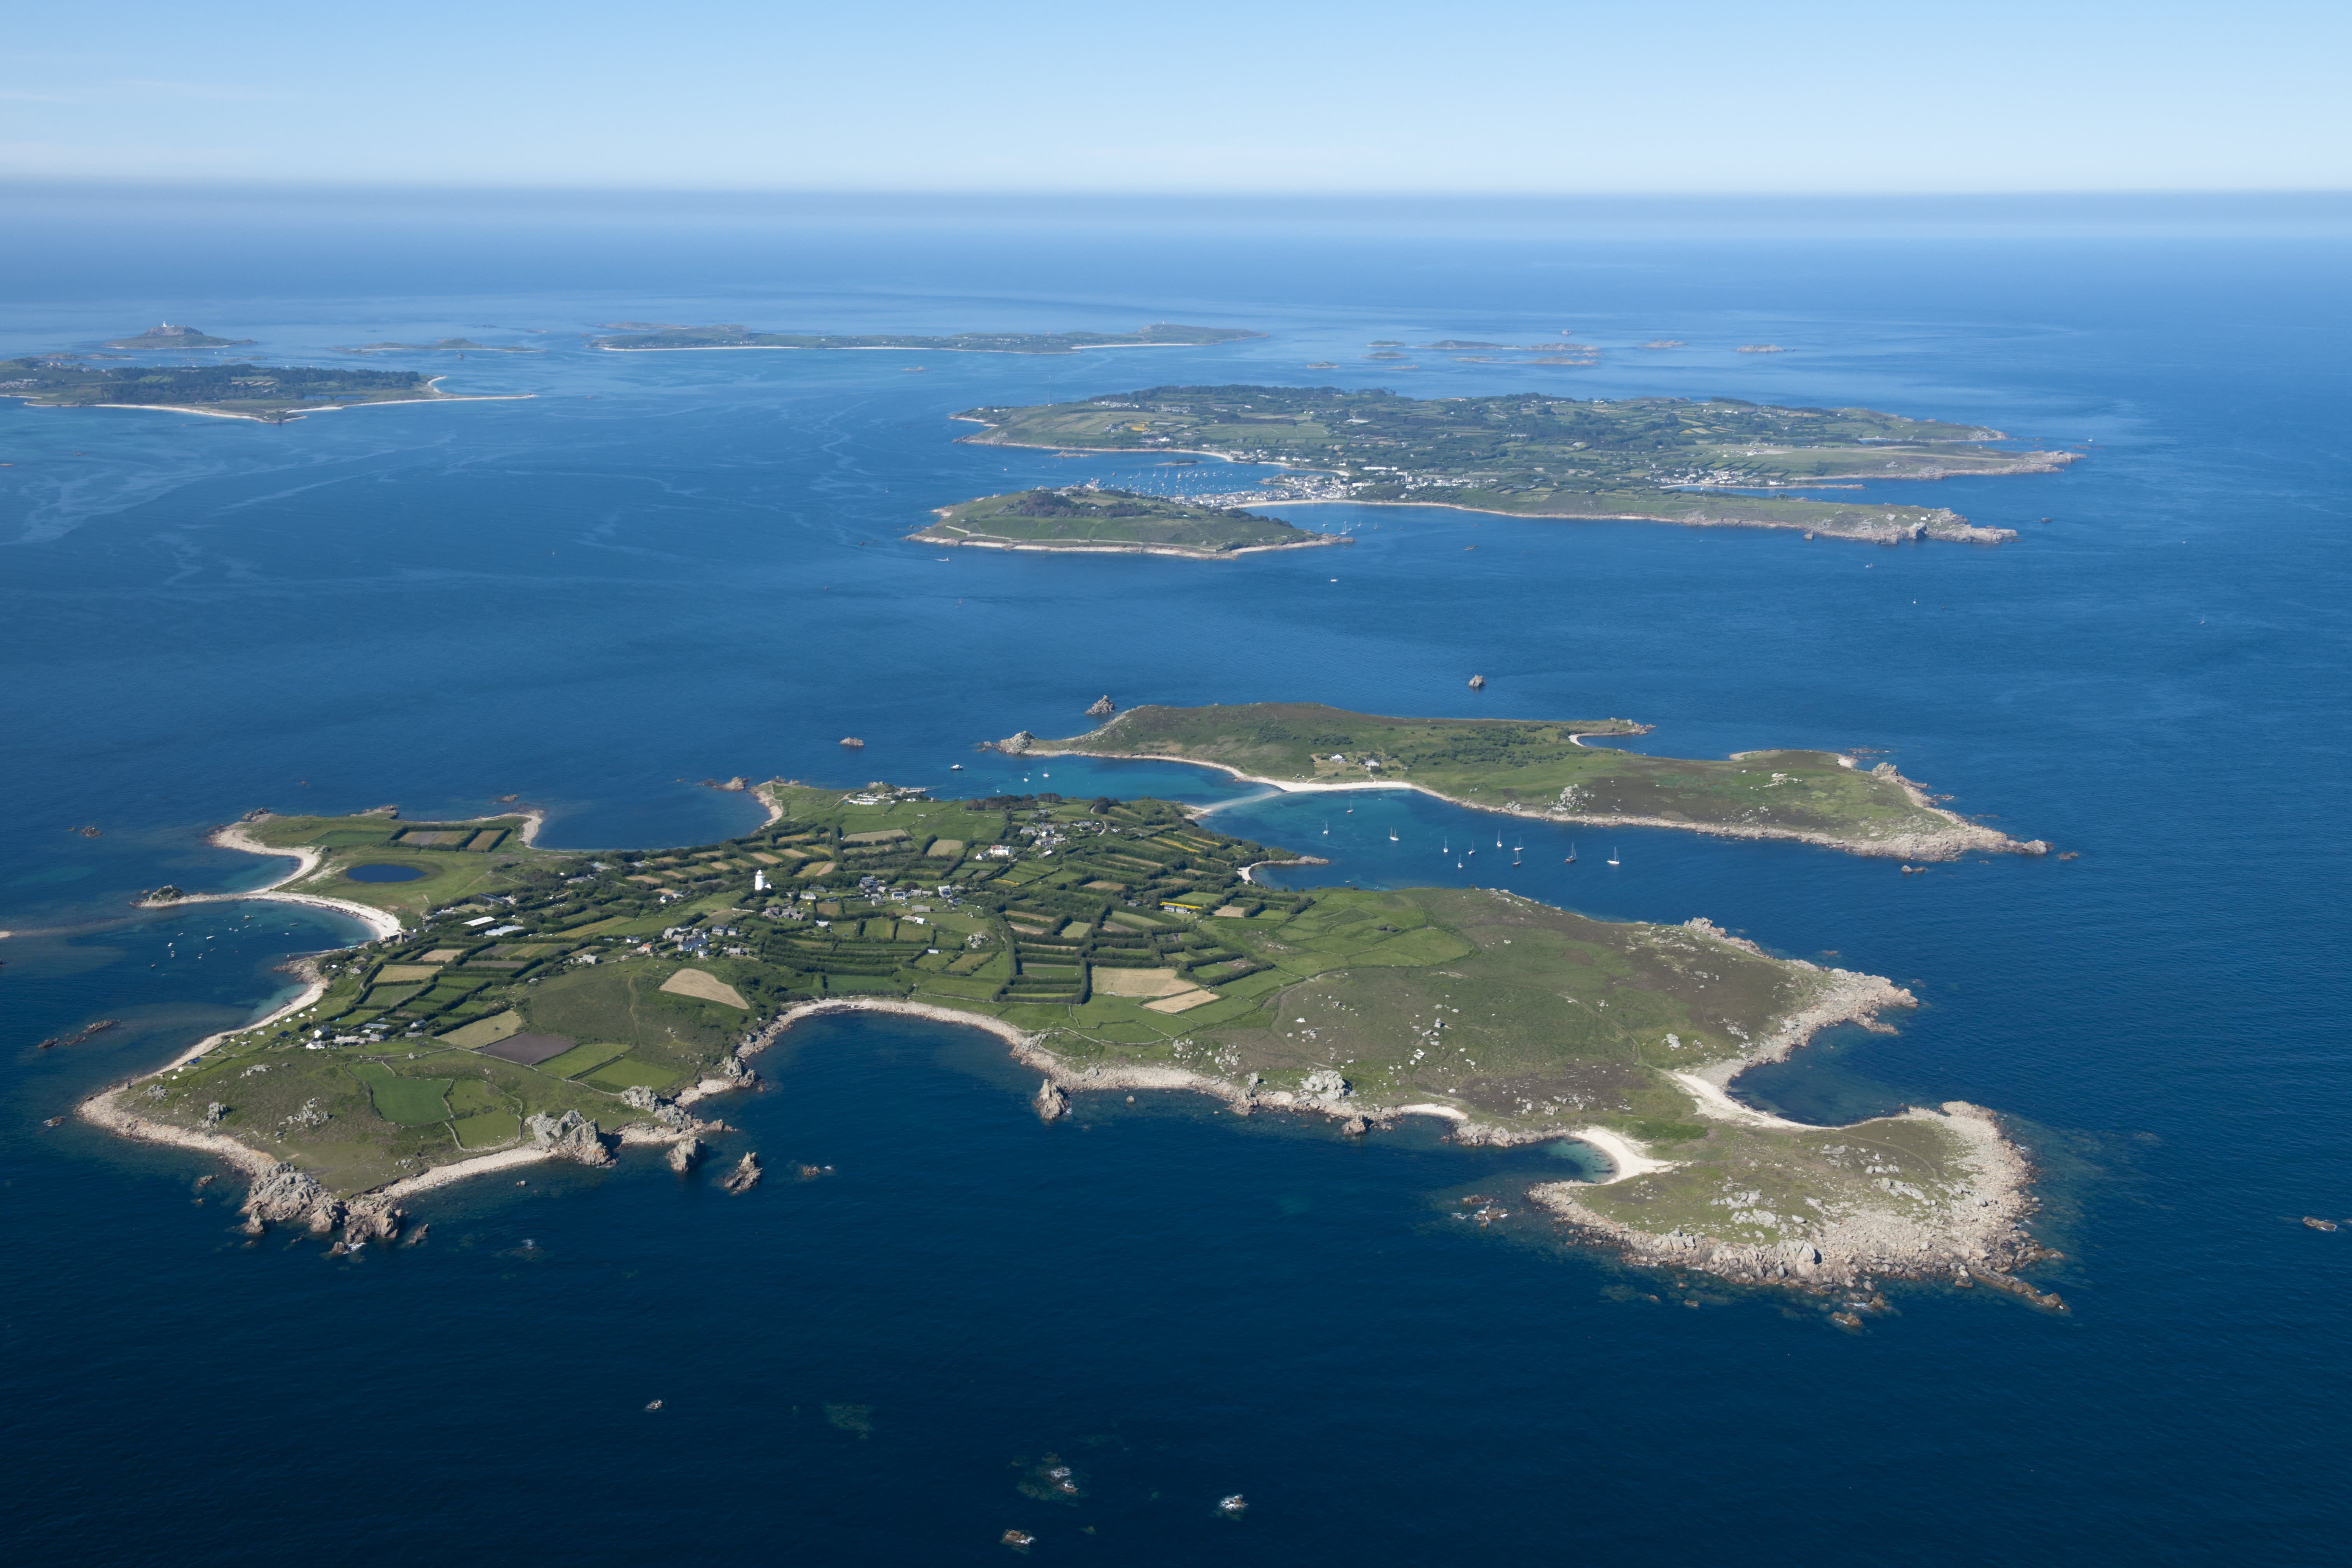 Archipelago to explore the potential of wave, tidal and floating wind energy